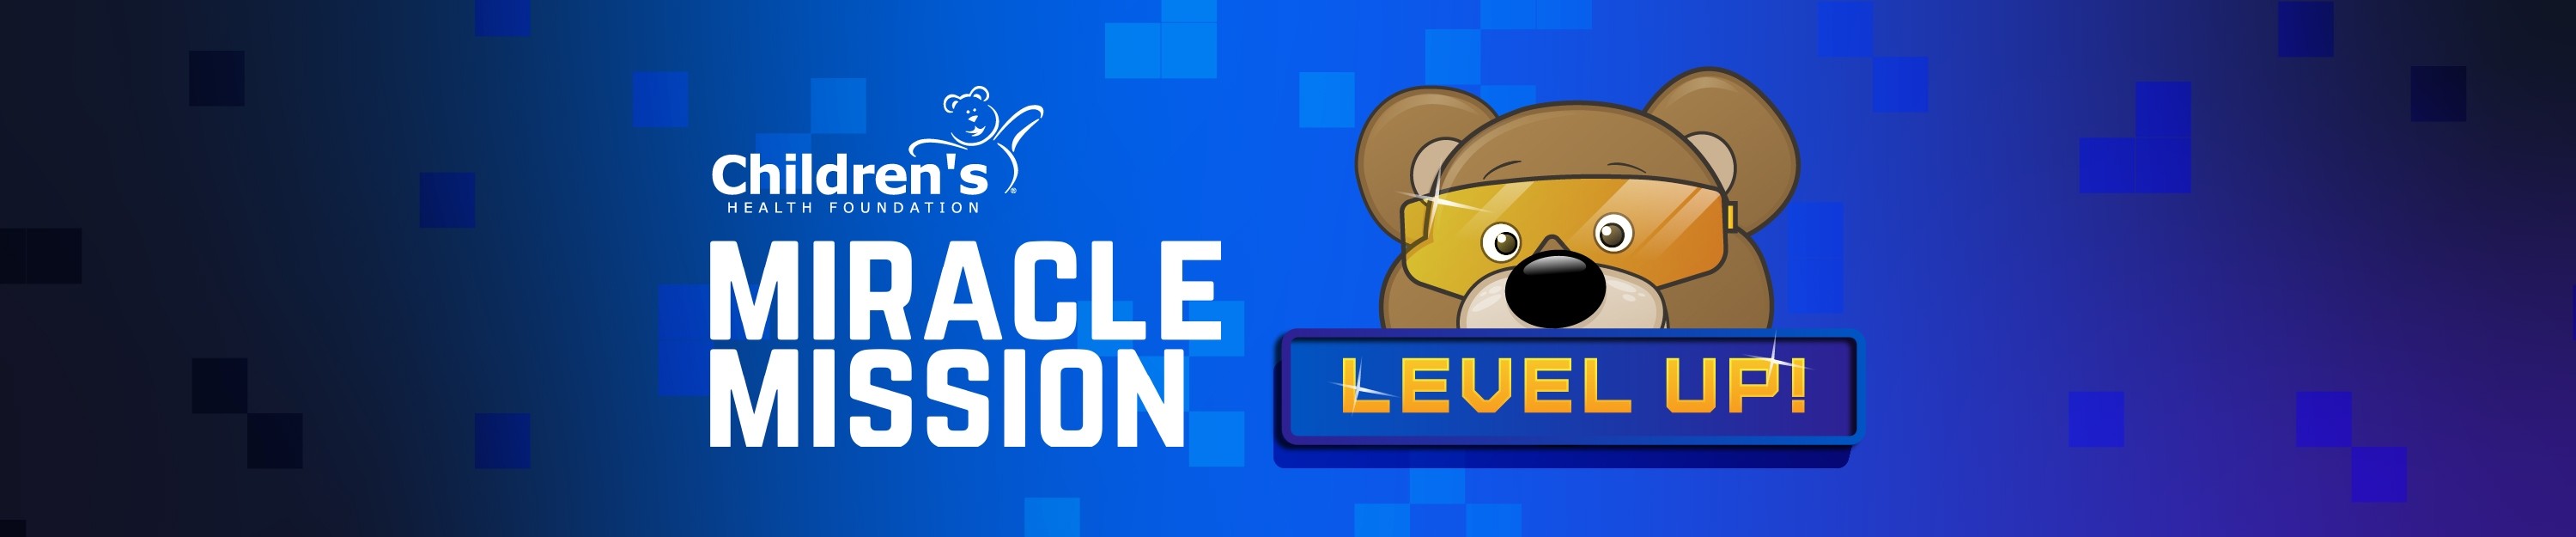 Children's Miracle Mission | Level Up!